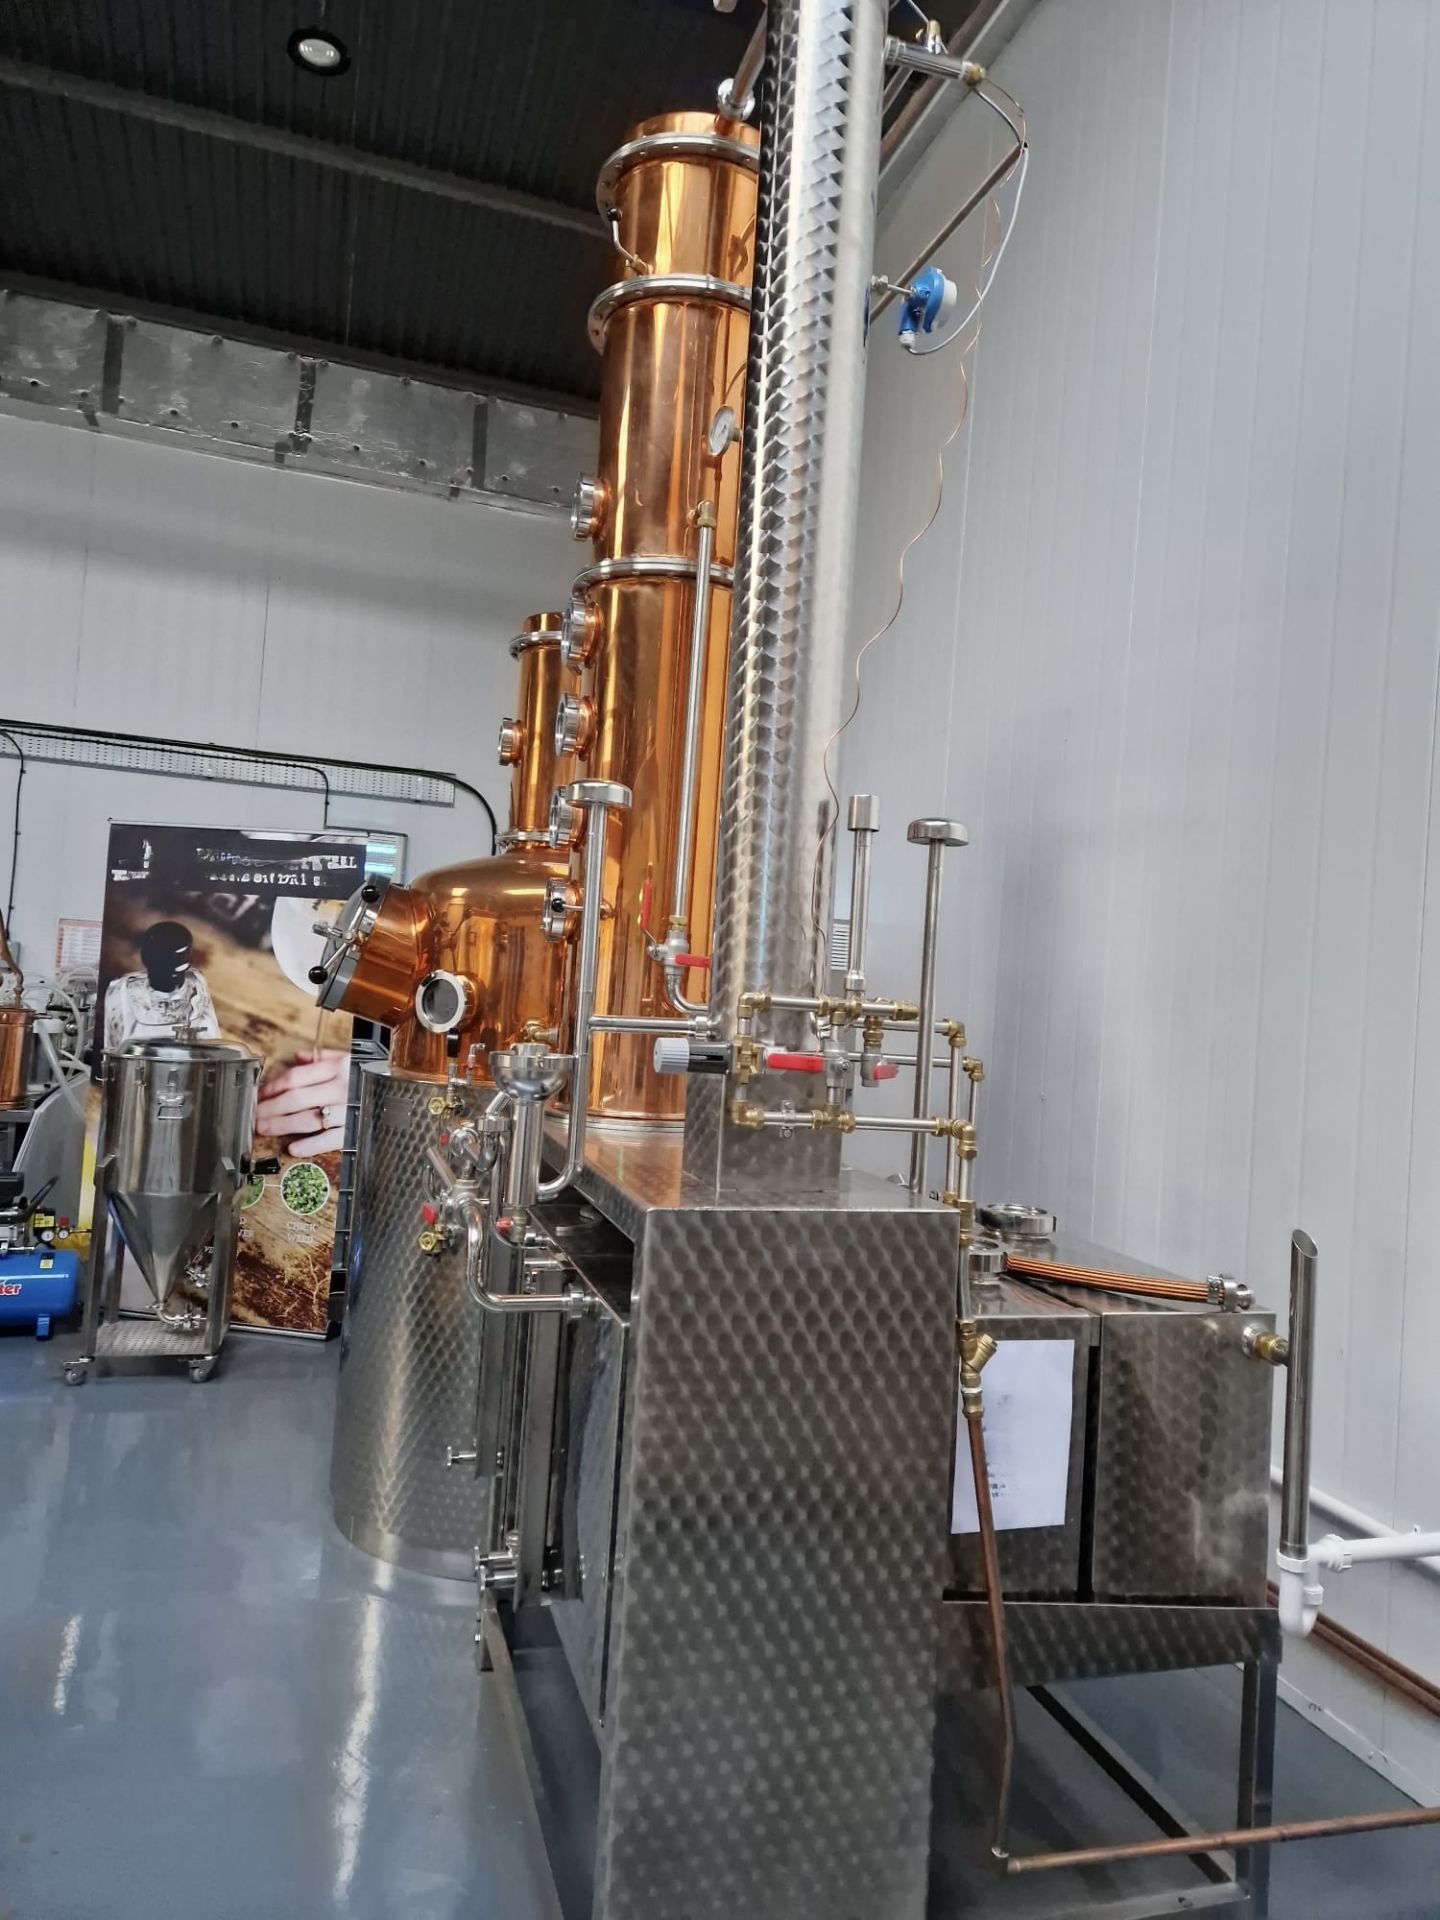 Arnold Holstein SH1000, 450L Pot Still. Installed and commissioned March 2022 - Image 8 of 9